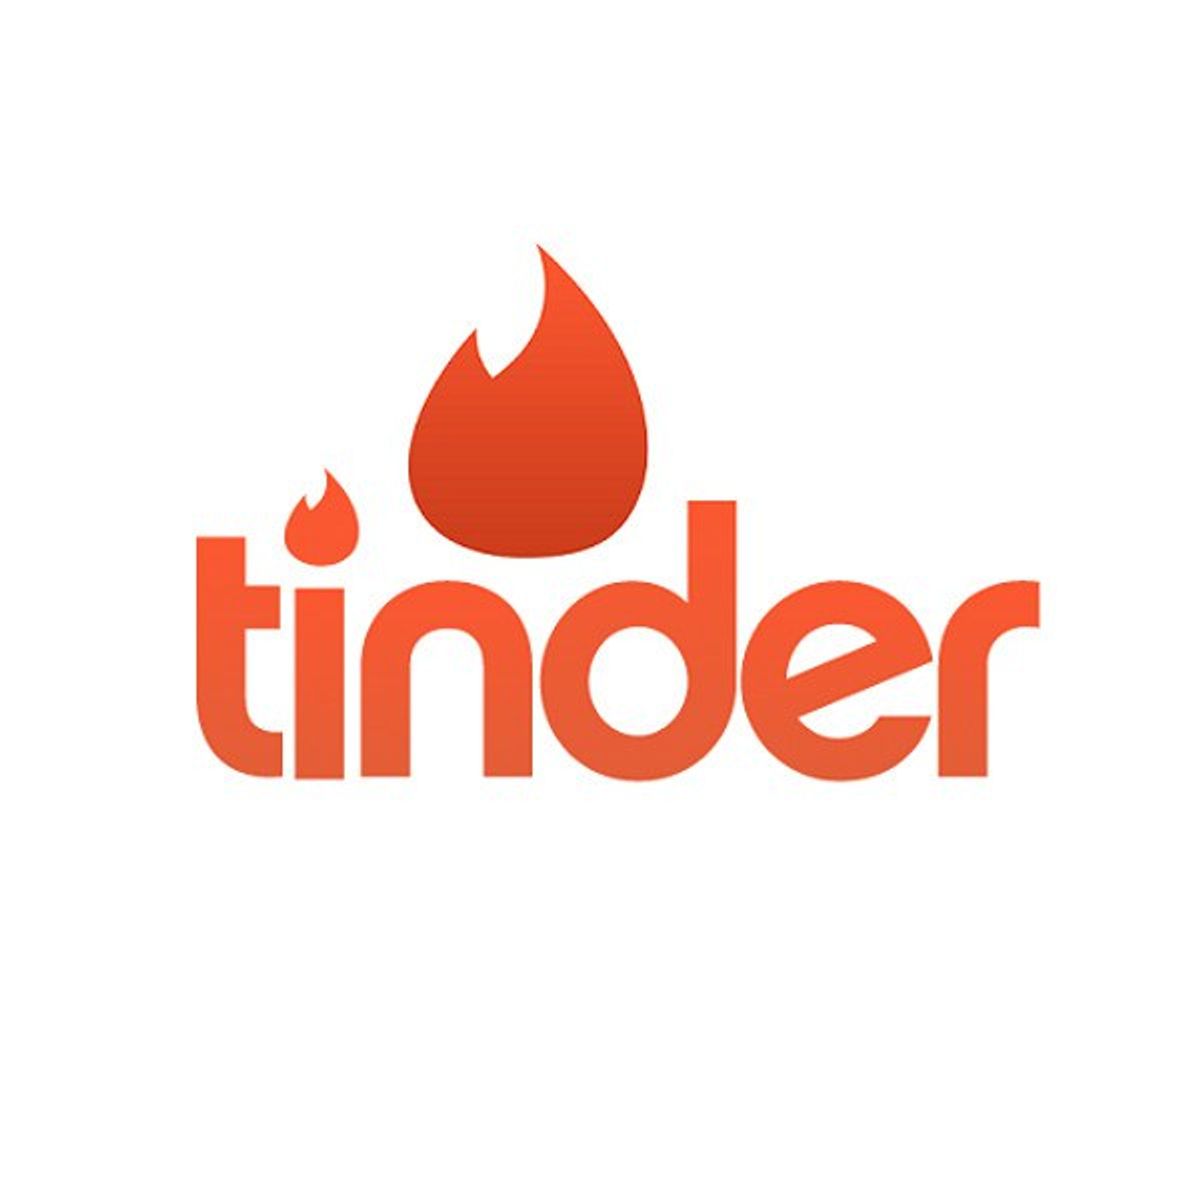 Getting Rid of the Tinder Stereotype